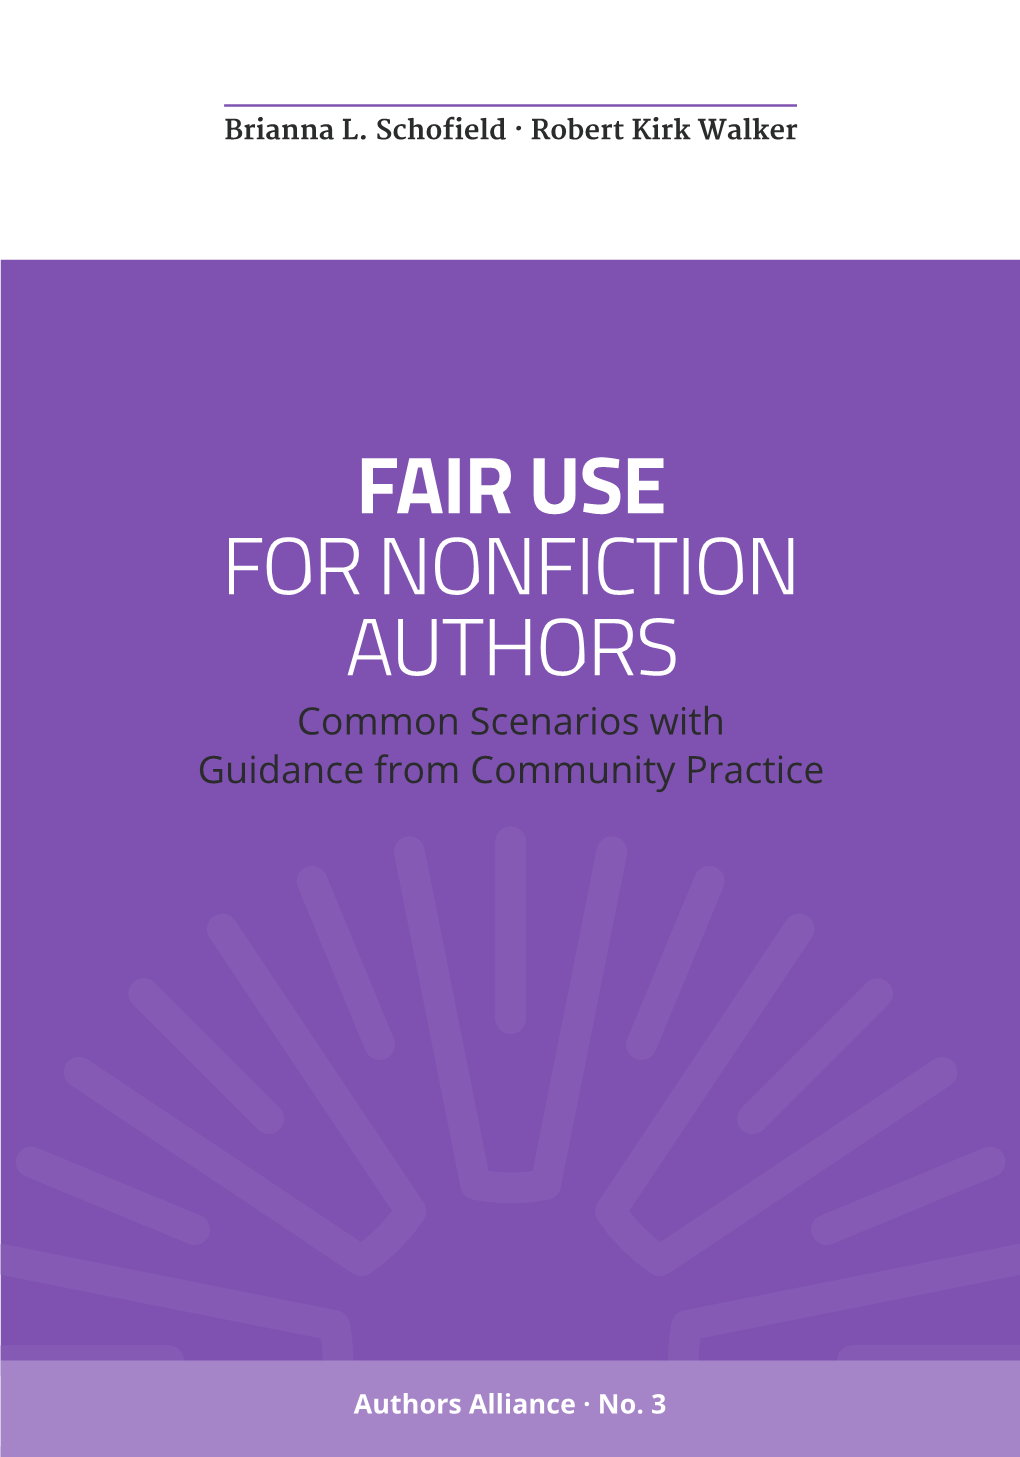 FAIR USE for NONFICTION AUTHORS Common Scenarios with Guidance from Community Practice